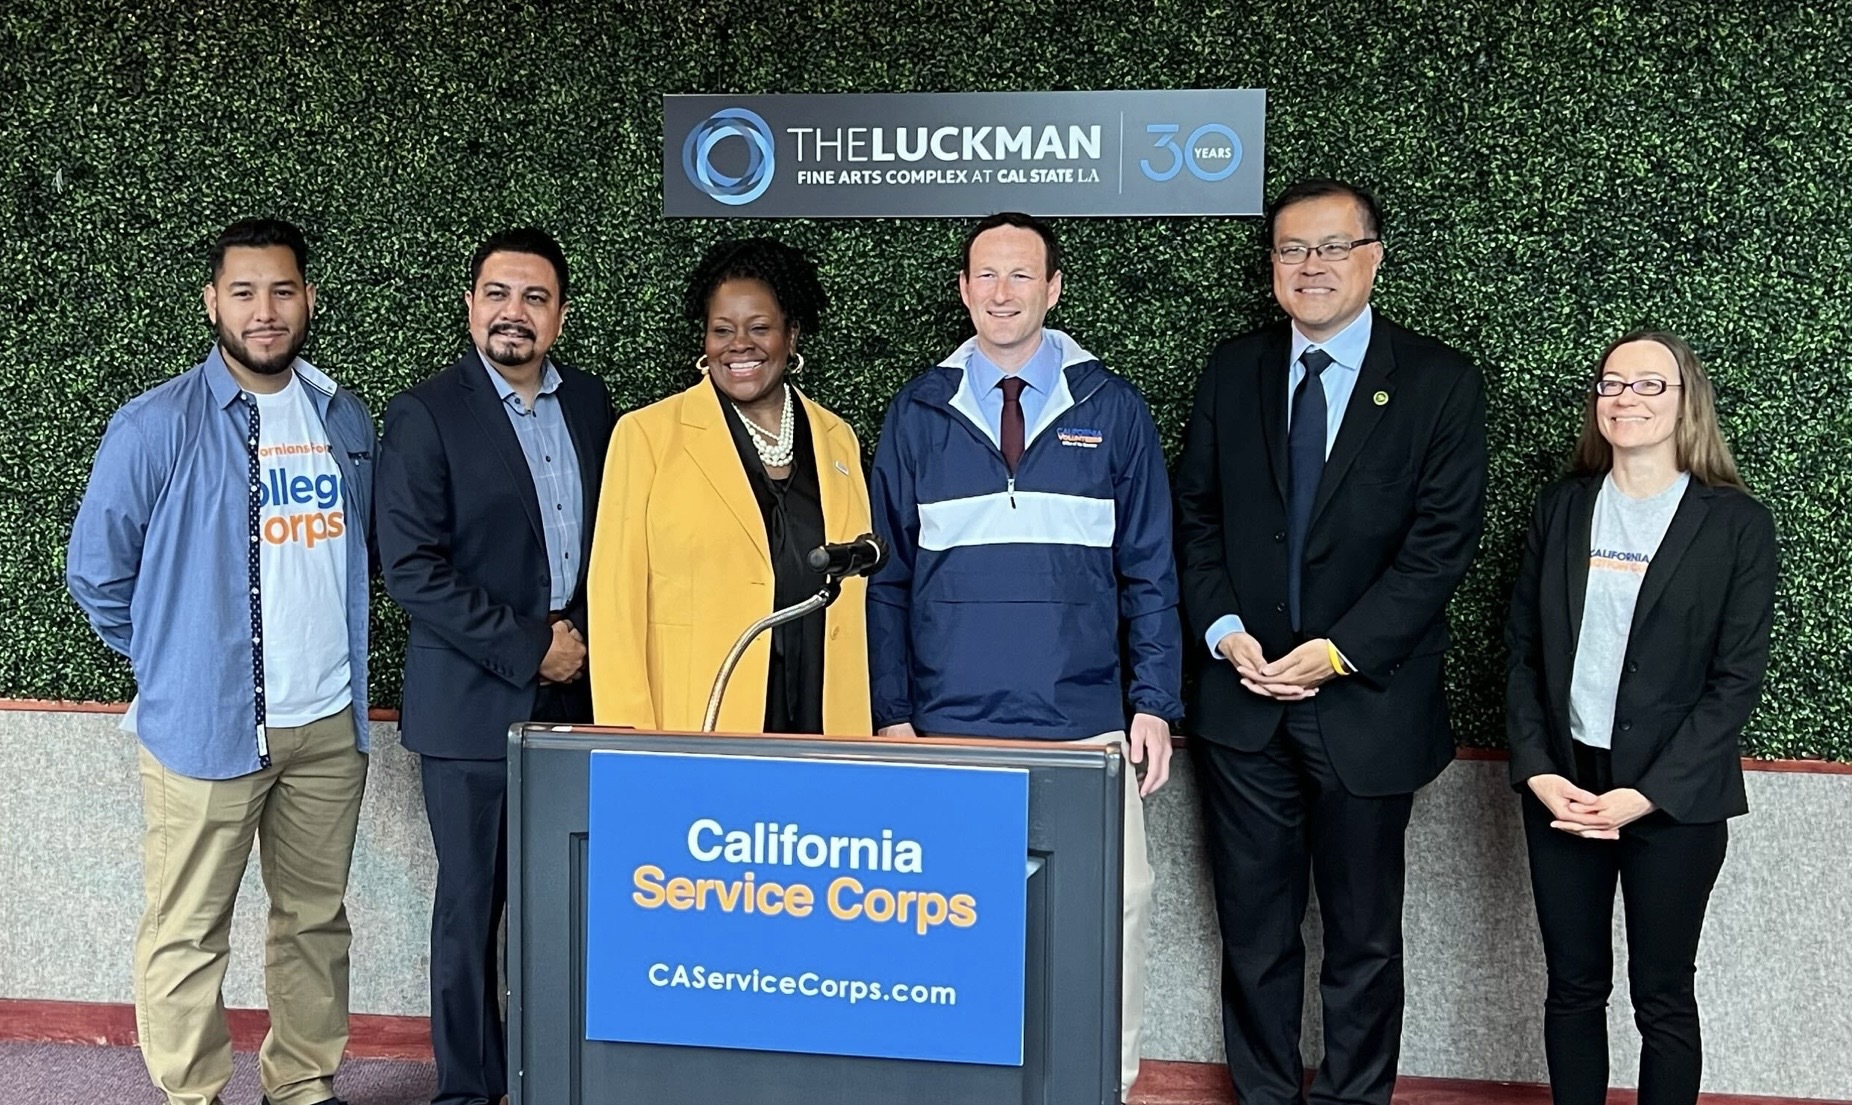 College Corps Fellow Diego Ramos Lopez, East Los Angeles College President Dr. Alberto J. Roman, Cal State LA President Dr. Berenecea Johnson Eanes, Chief Service Officer Josh Fryday, State Assemblymember Mike Fong, and California Climate Action Corps Fellow Kacey Donner gather to announce California Service Corps recruitment effort in the Los Angeles Region.